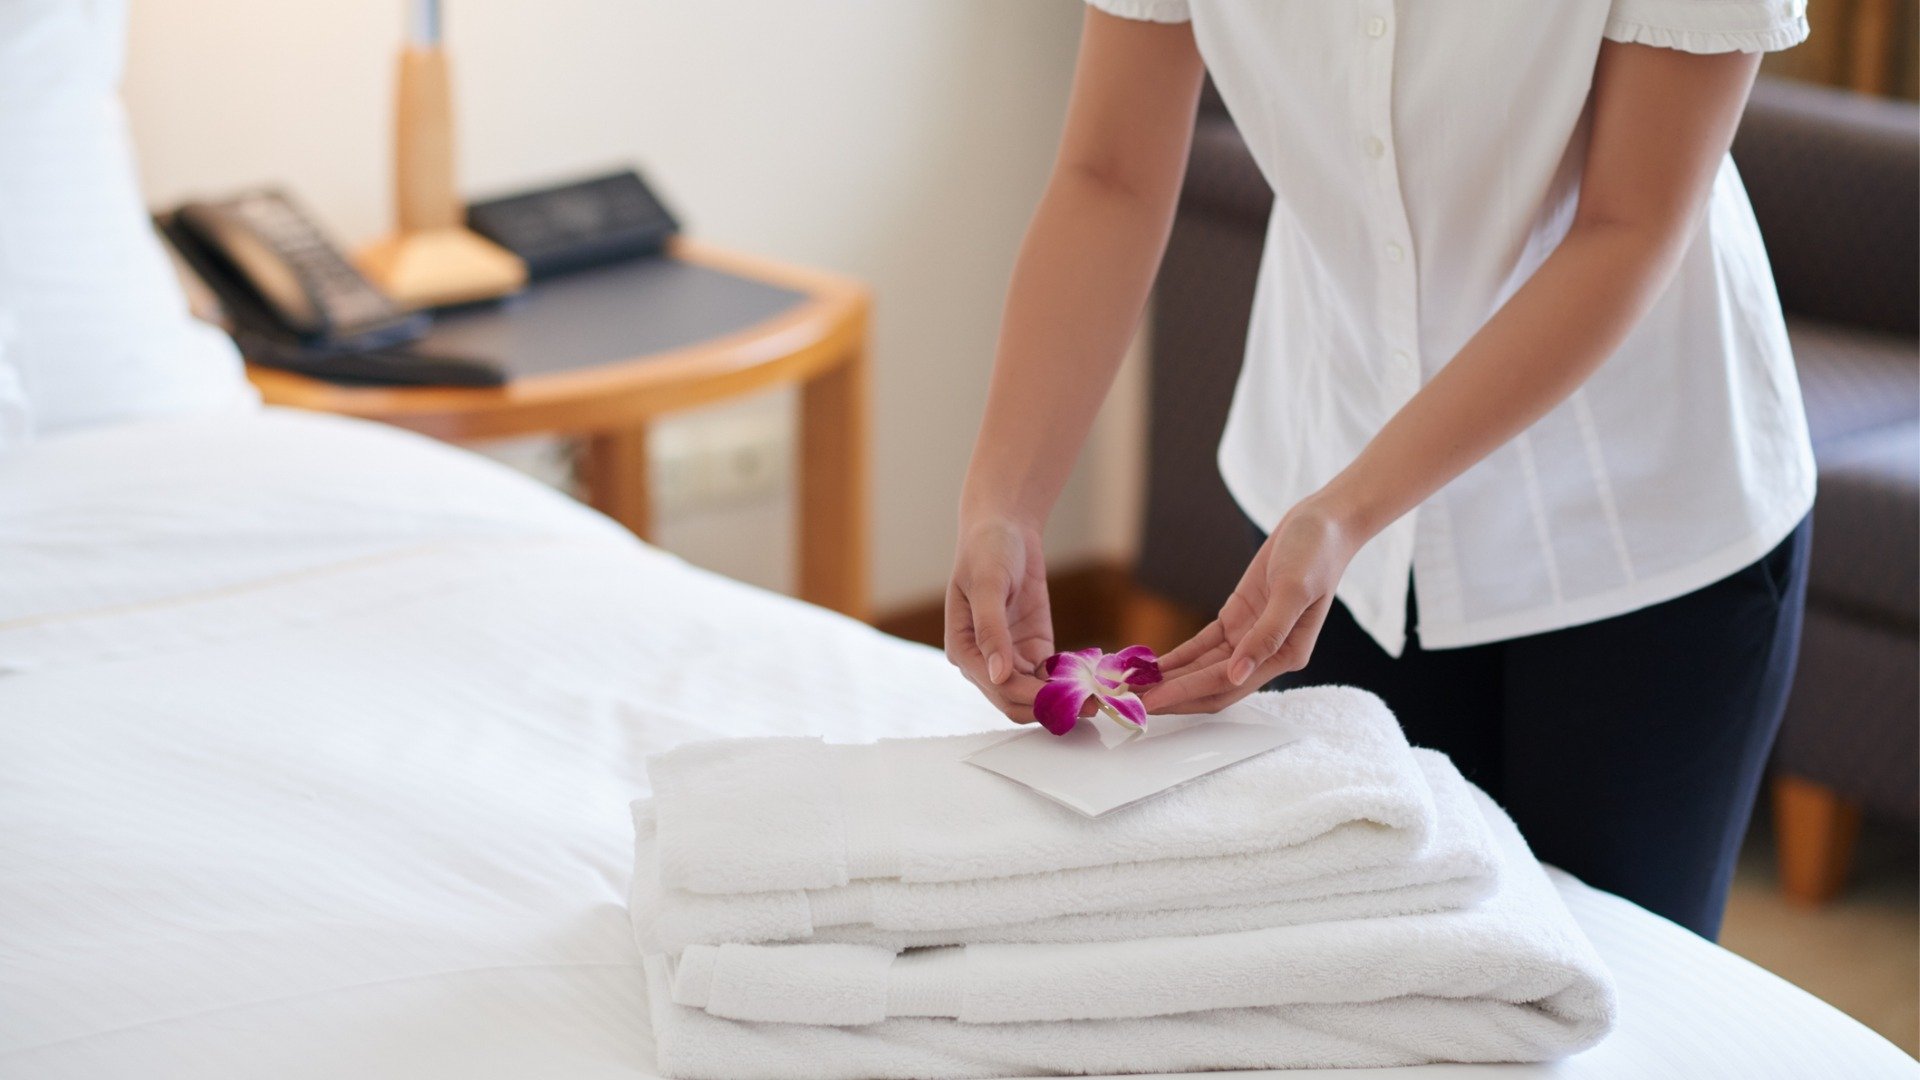 This image shows a woman placing a fresh flower and a note on a pile of towels on a hotel bed. 